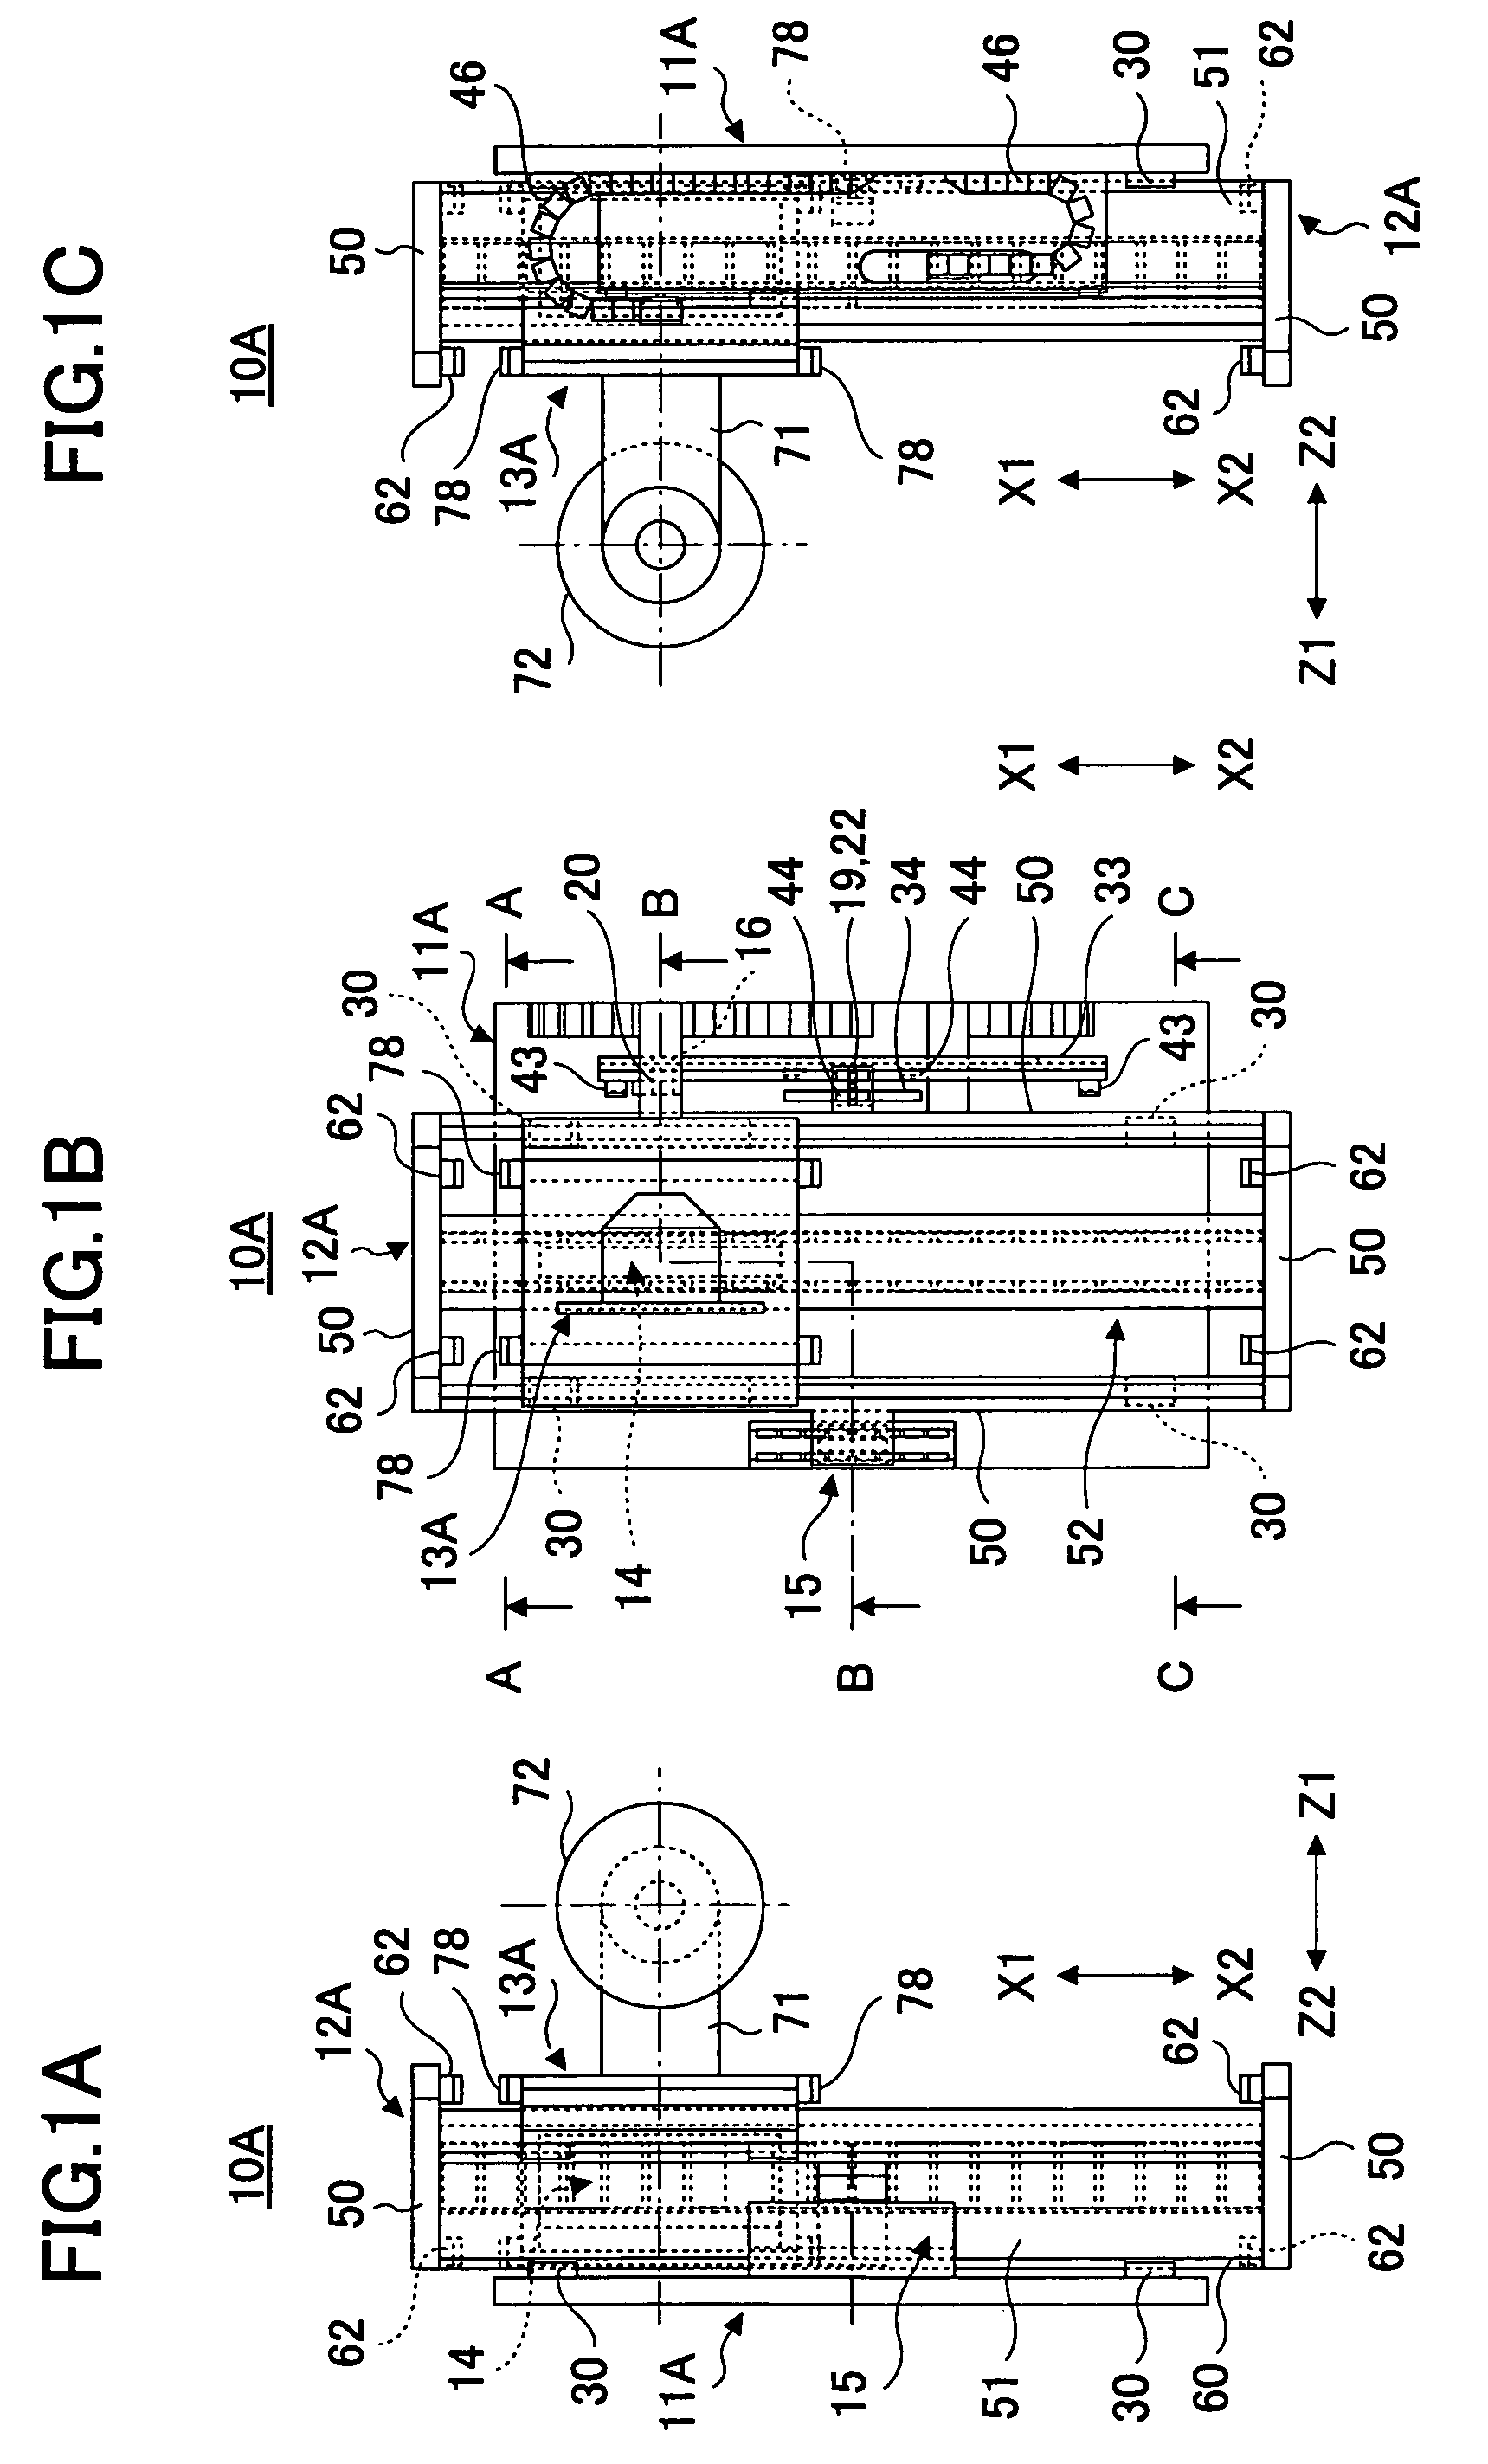 Method of controlling mover device